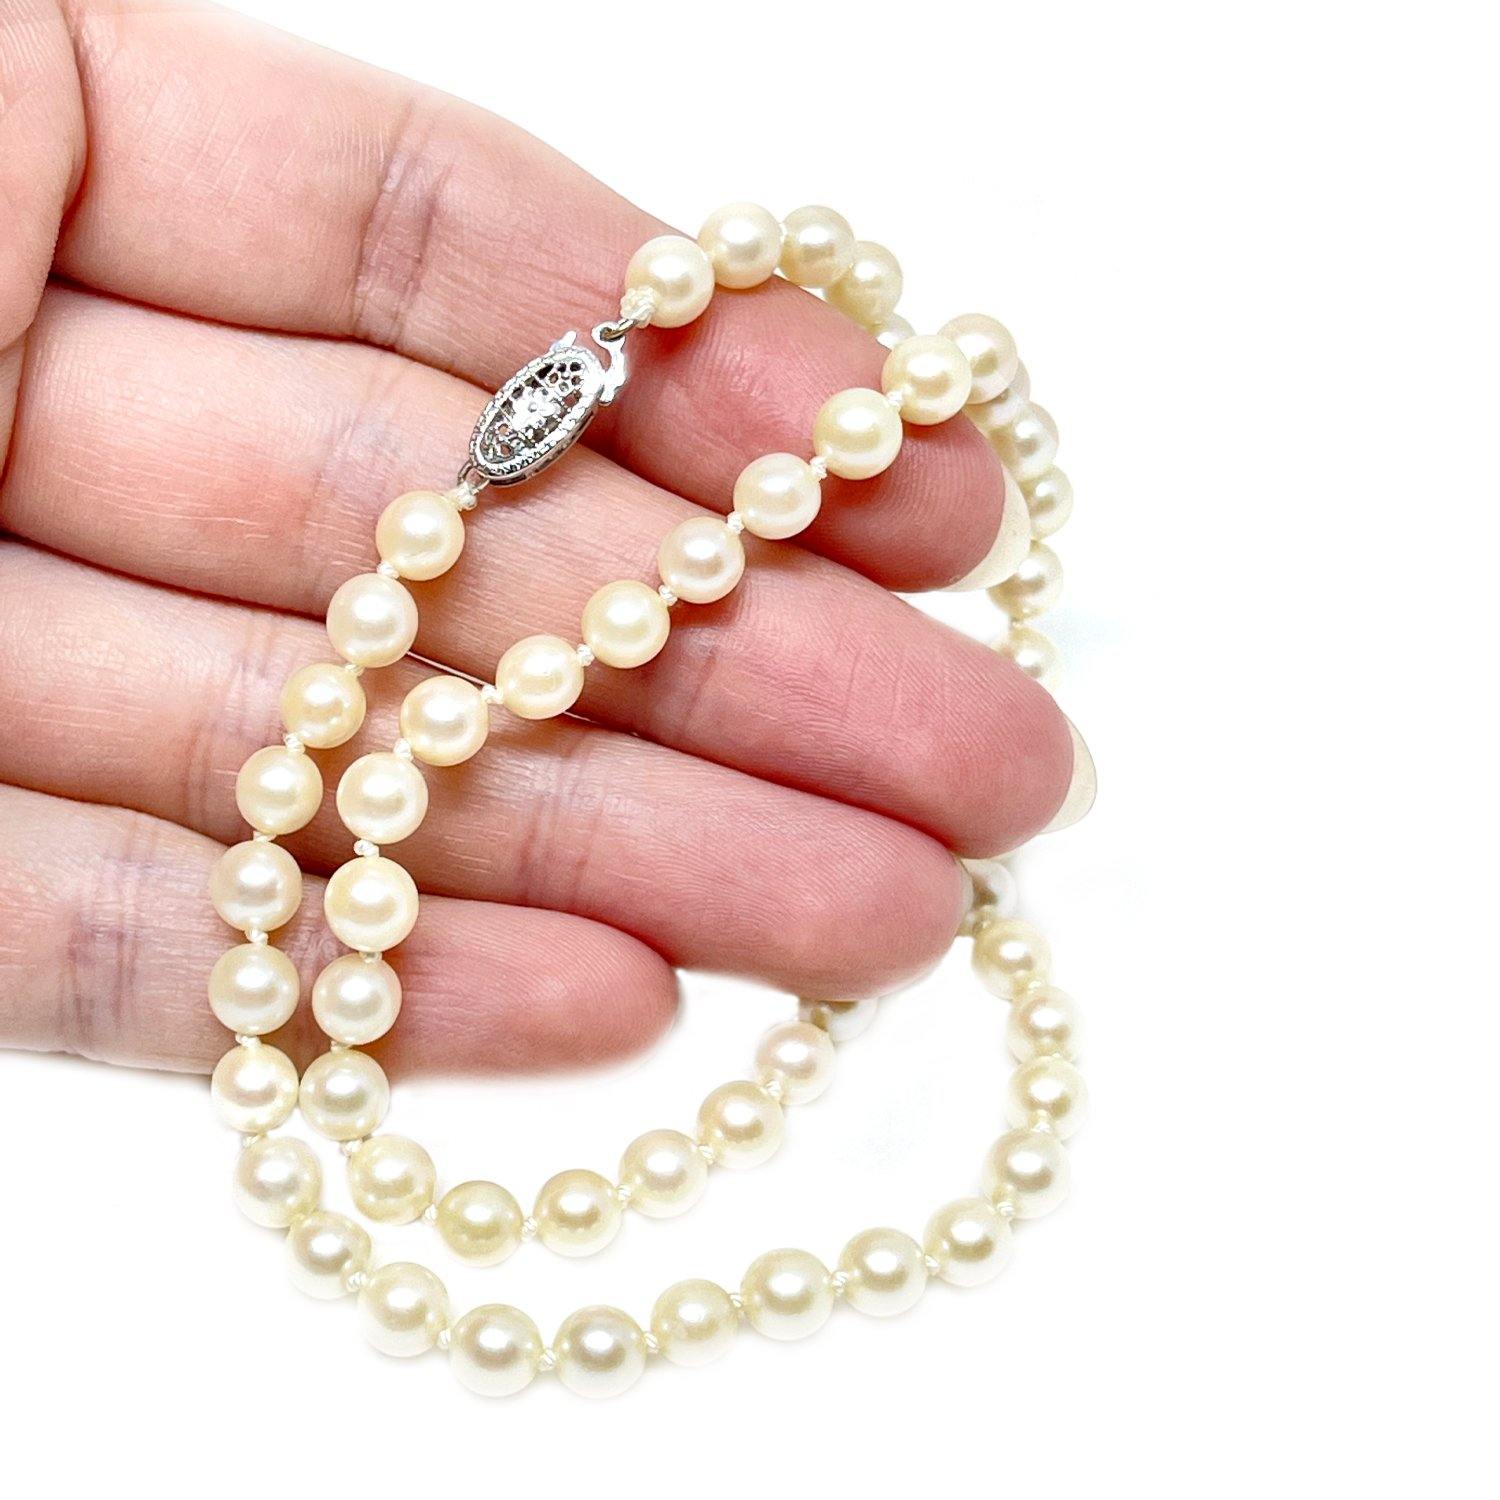 Graduated Blossom Japanese Saltwater Cultured Akoya Pearl Strand - 14K White Gold 15.50 Inch